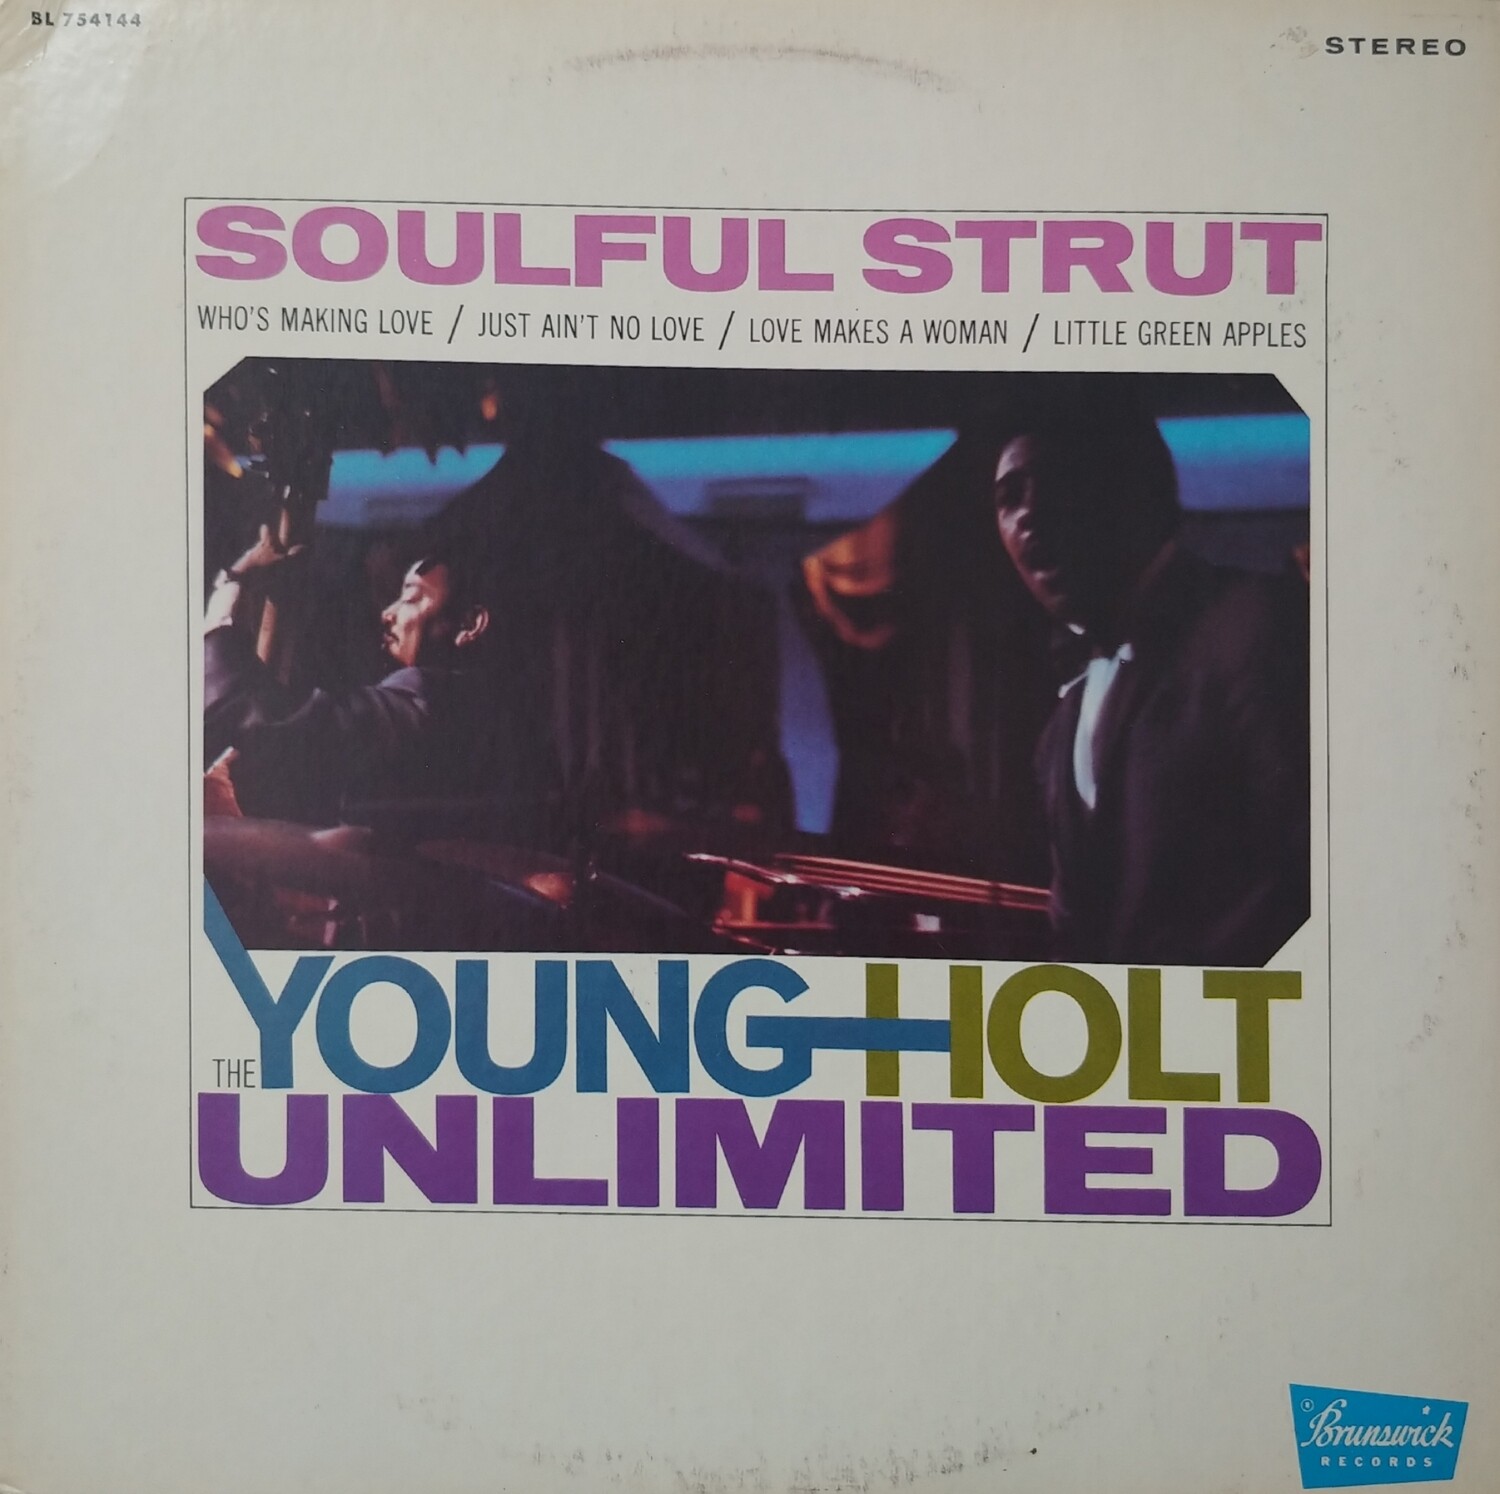 Soulful Strut - The Young Holt Unlimited